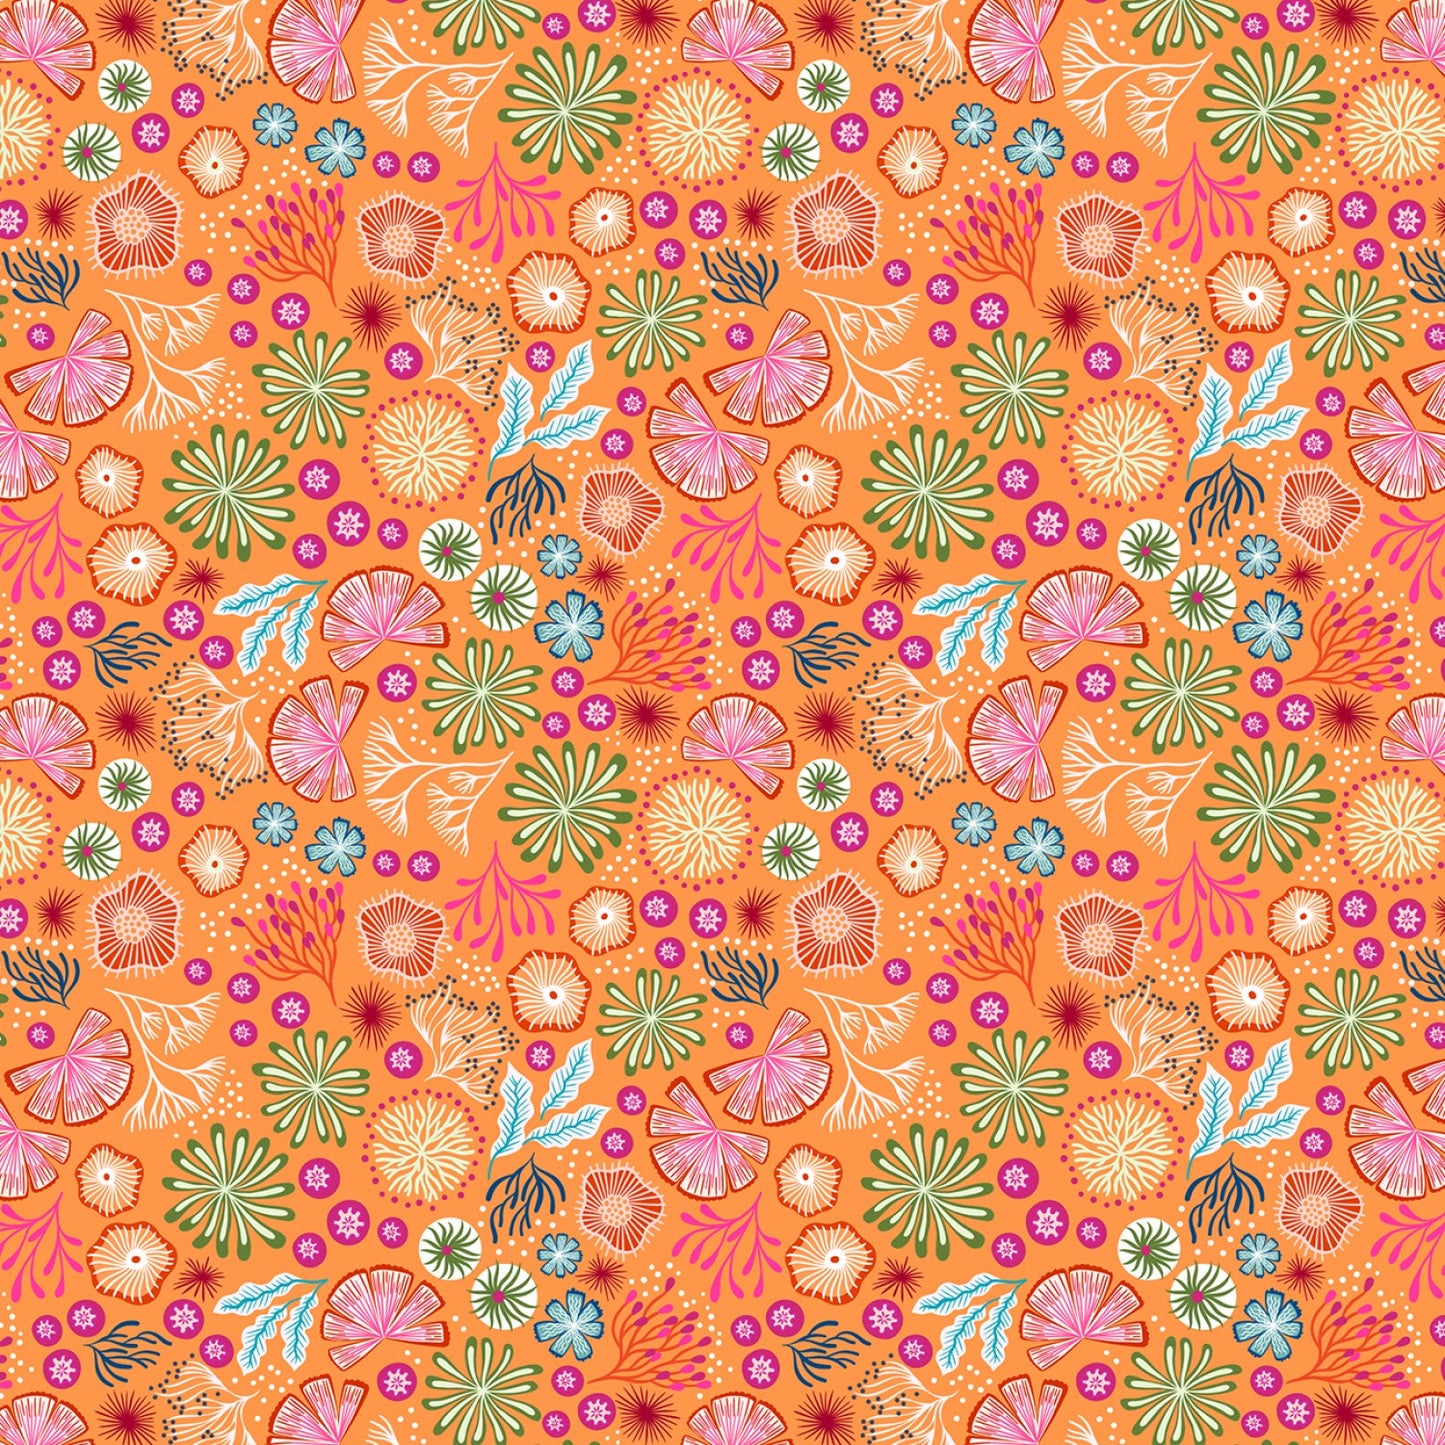 Ocean Glow (Glow in the Dark) Coral on Orange    A783.2 Cotton Woven Fabric